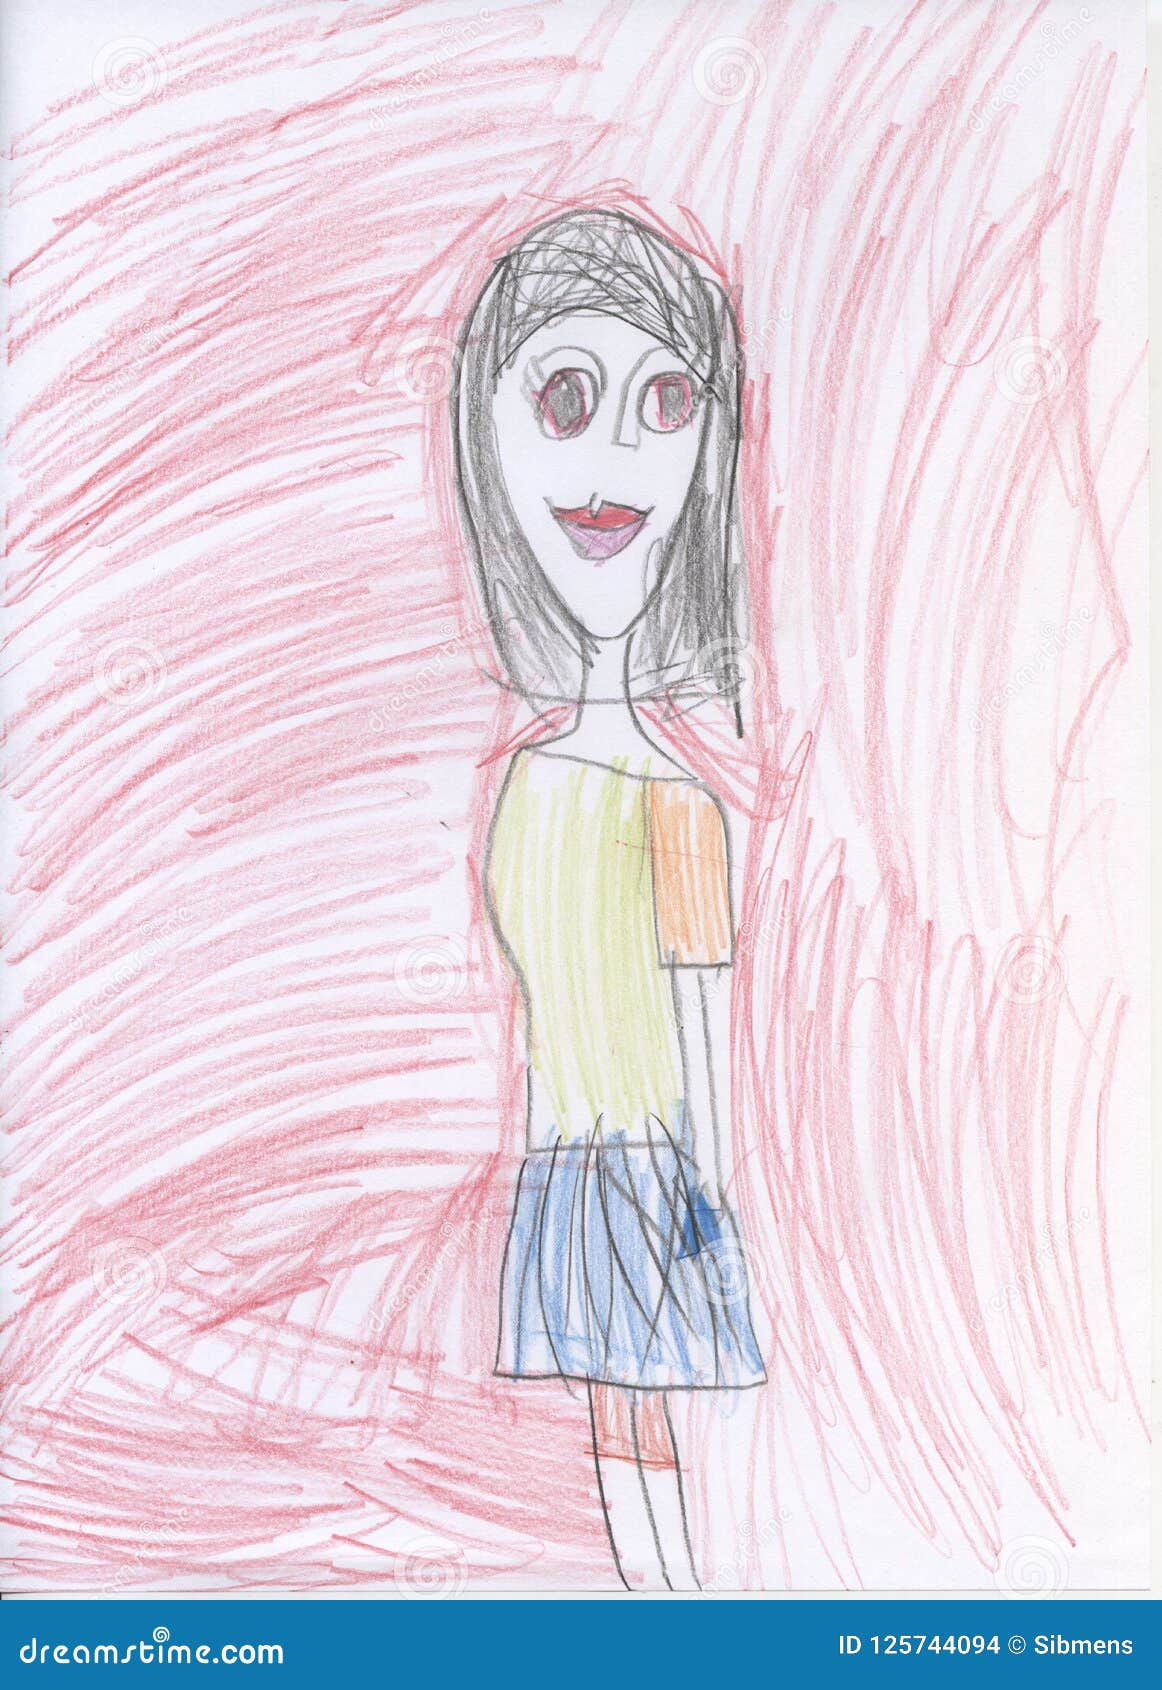 Childrens Pencil Drawings Portrait Of A Girl Stock